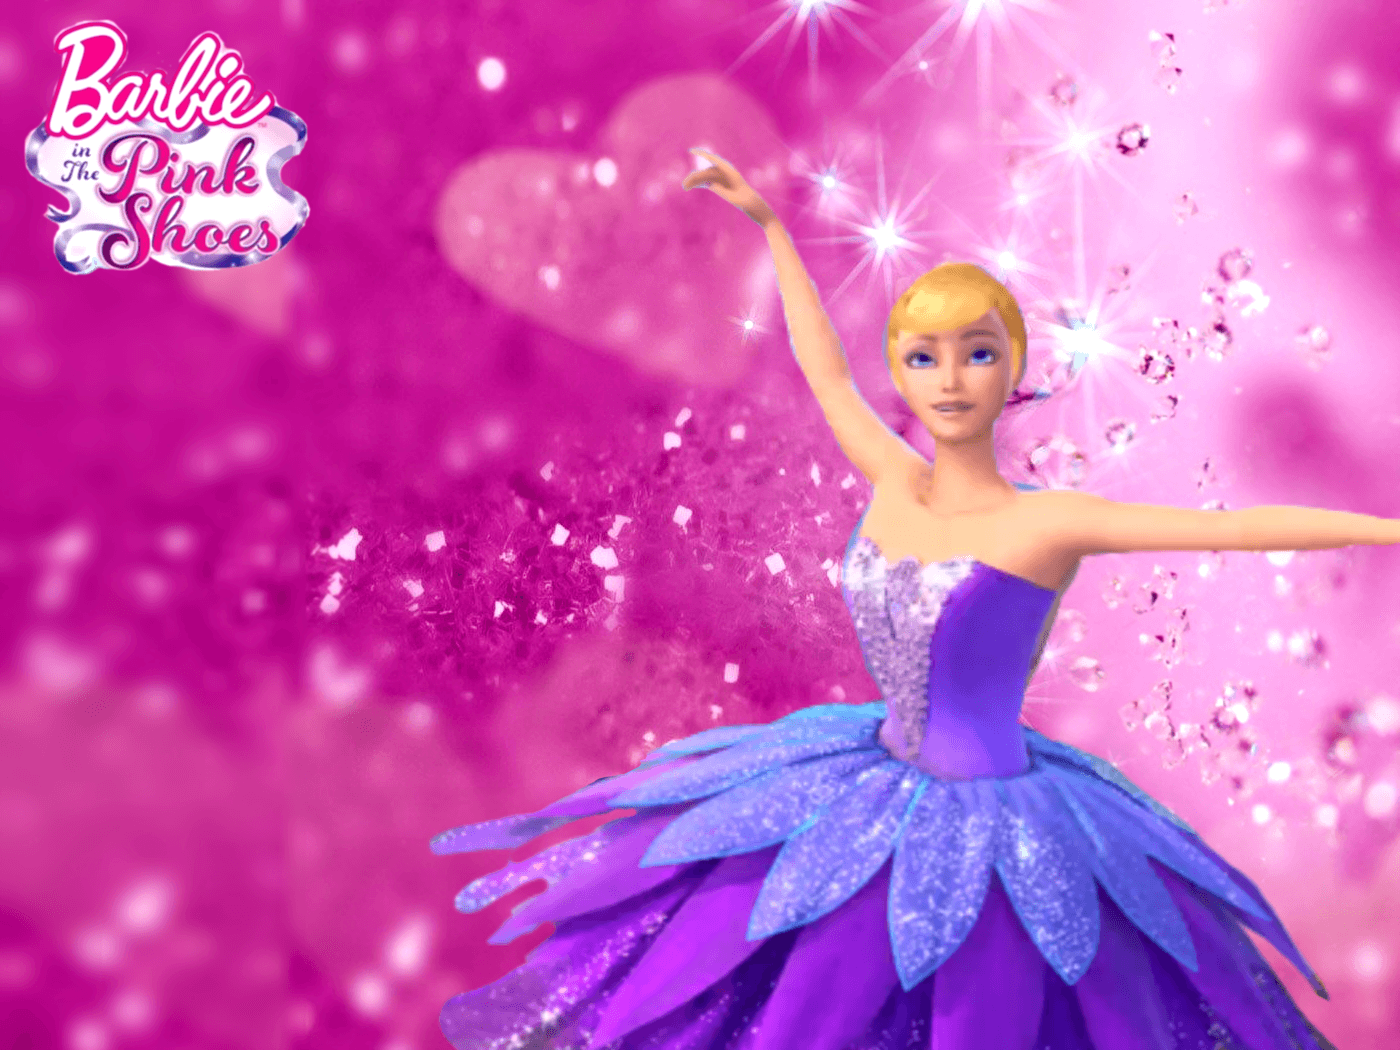 Barbie In The Pink Shoes Wallpapers by RavenVillanuevaT2P on DeviantArt